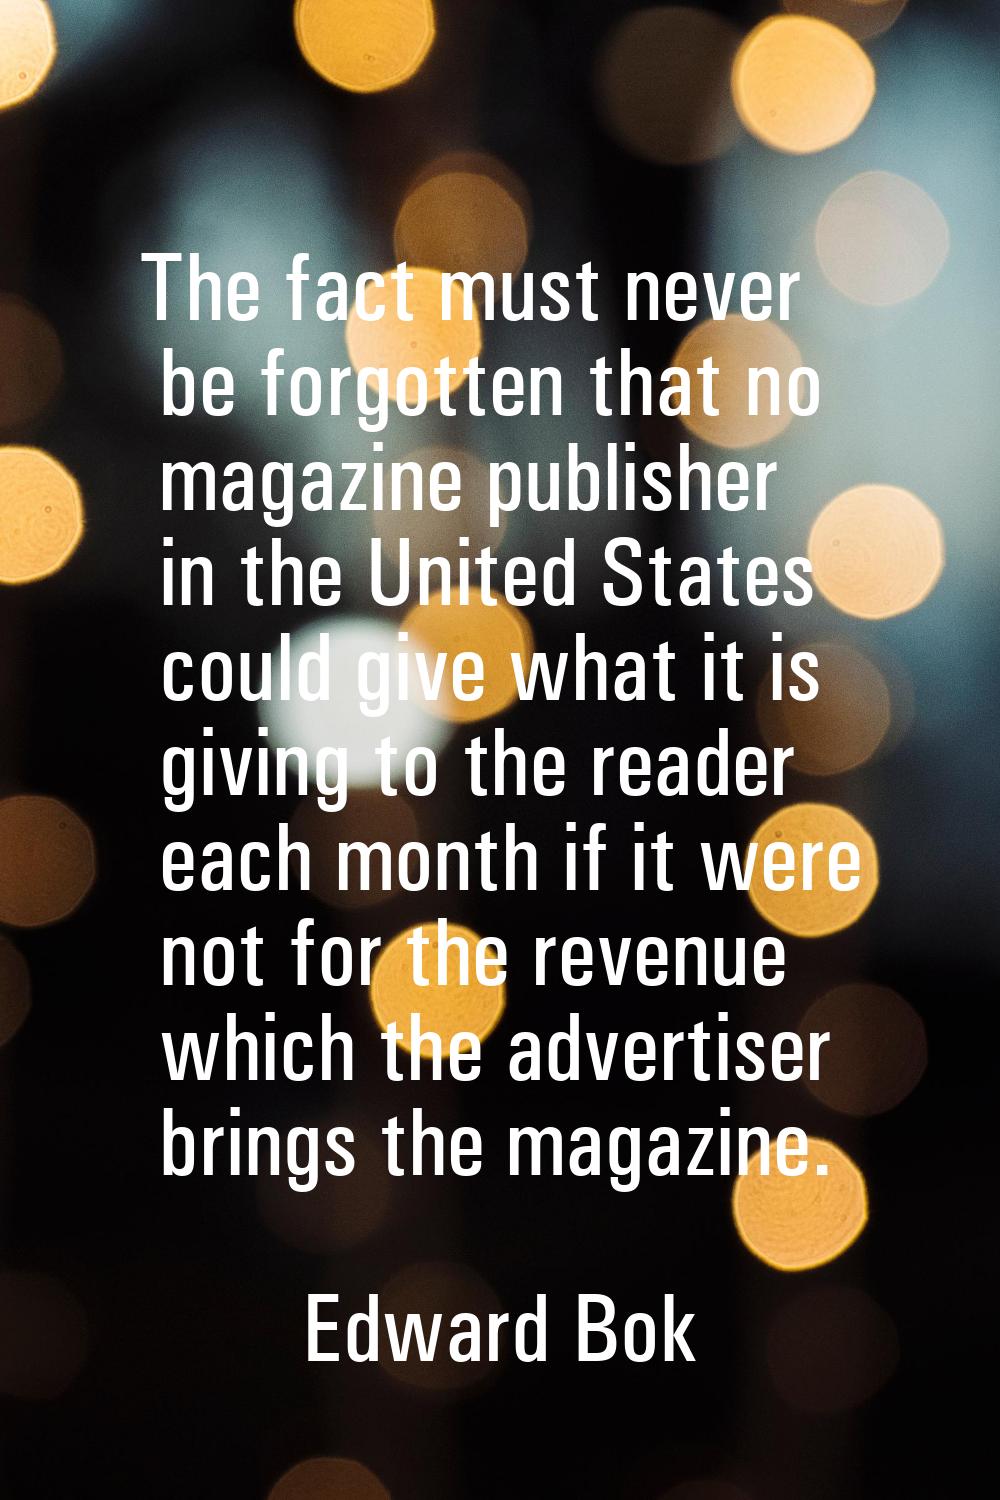 The fact must never be forgotten that no magazine publisher in the United States could give what it